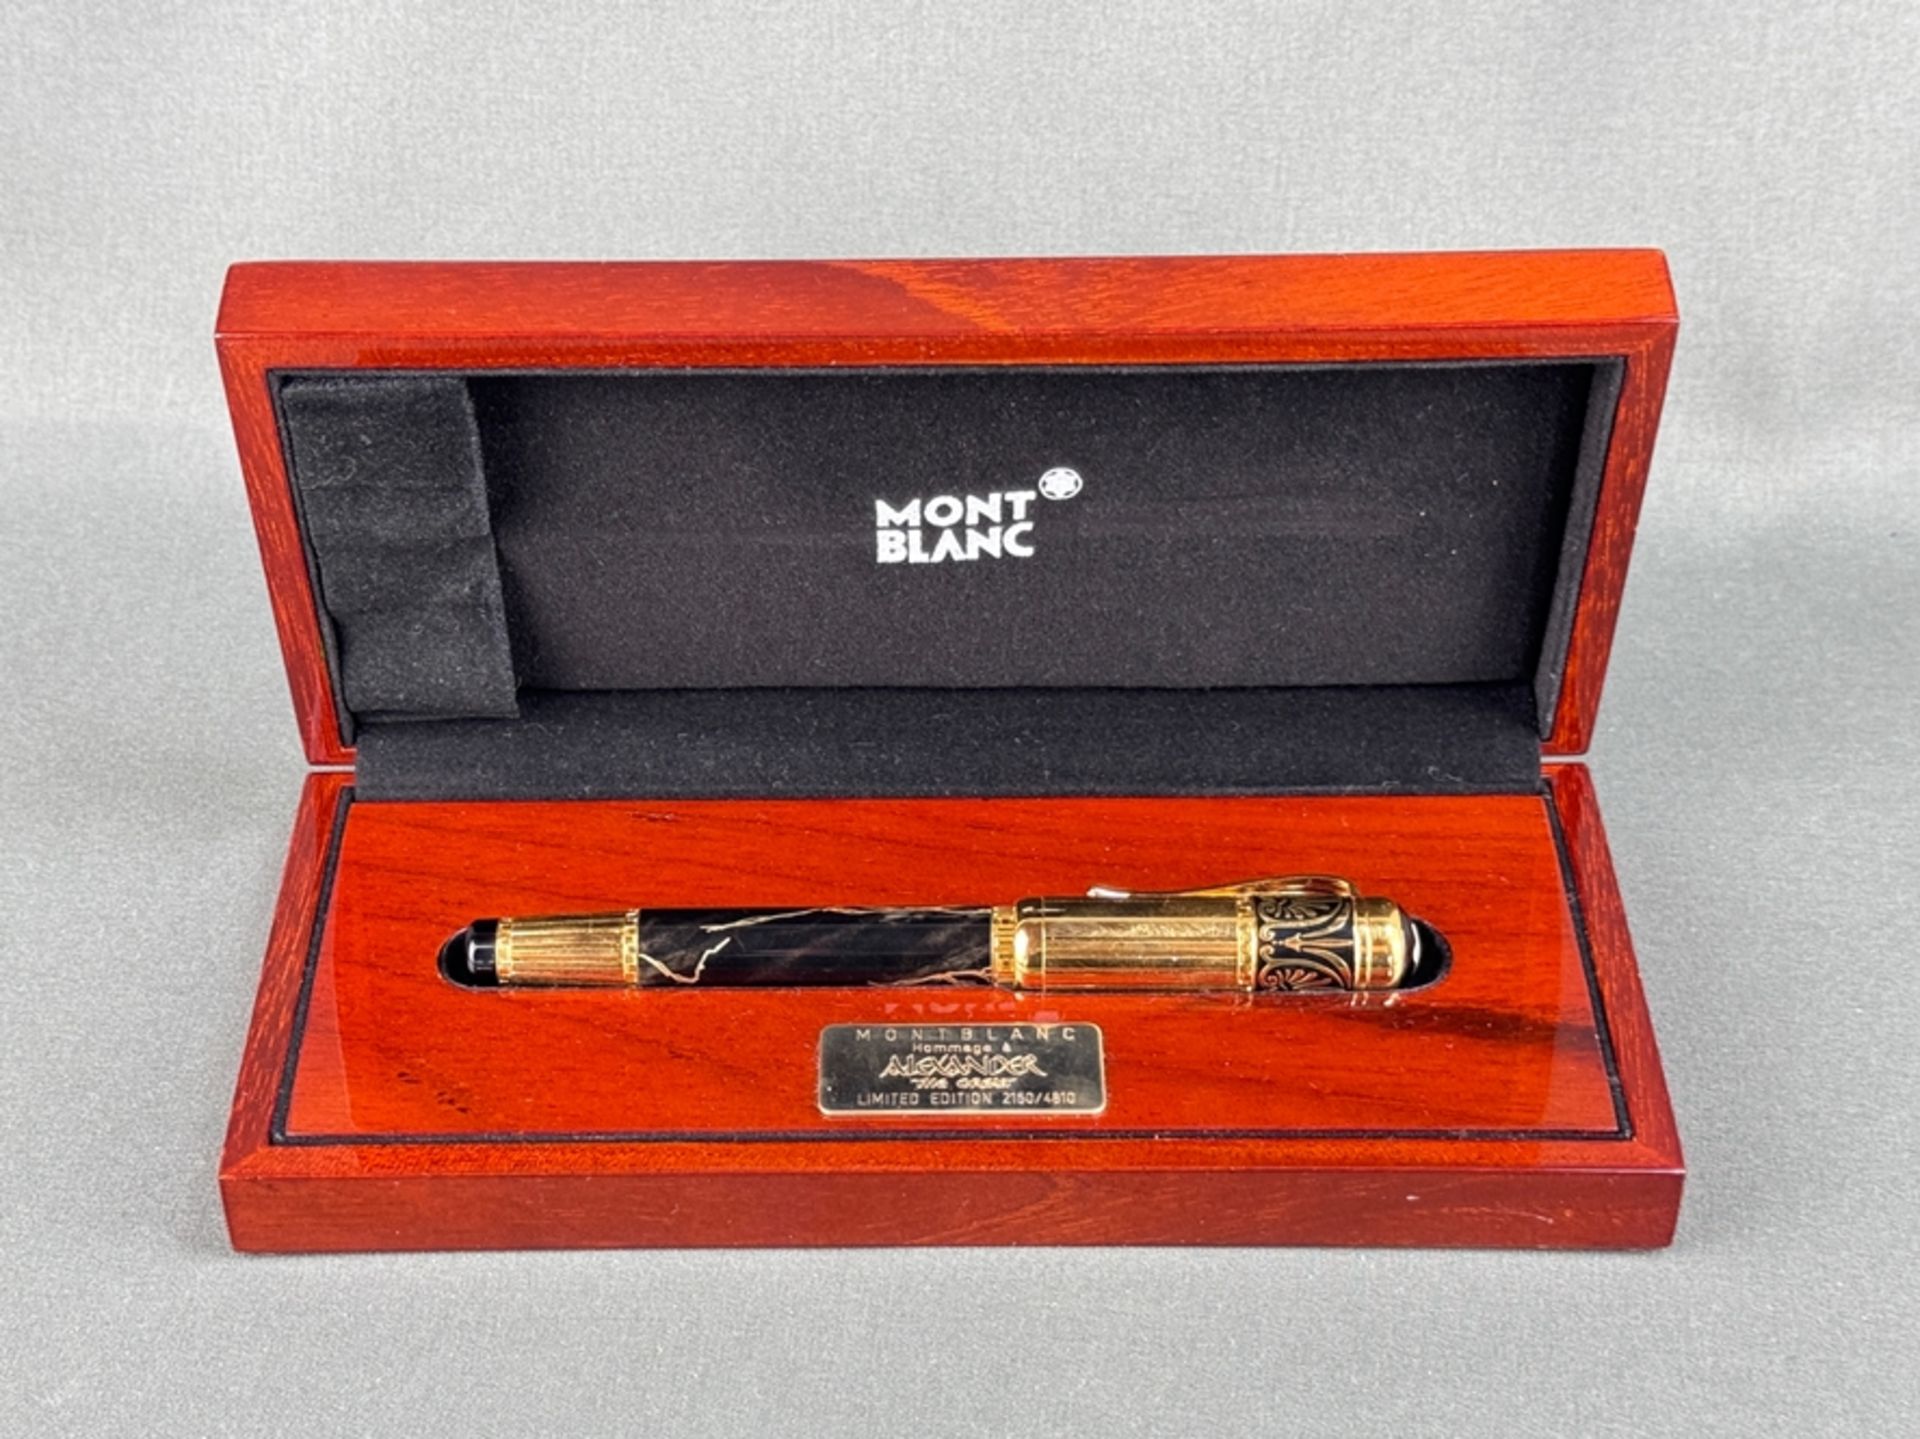 Montblanc fountain pen "Alexander the Great", limited edition 2150/4810, piston fountain pen with 7